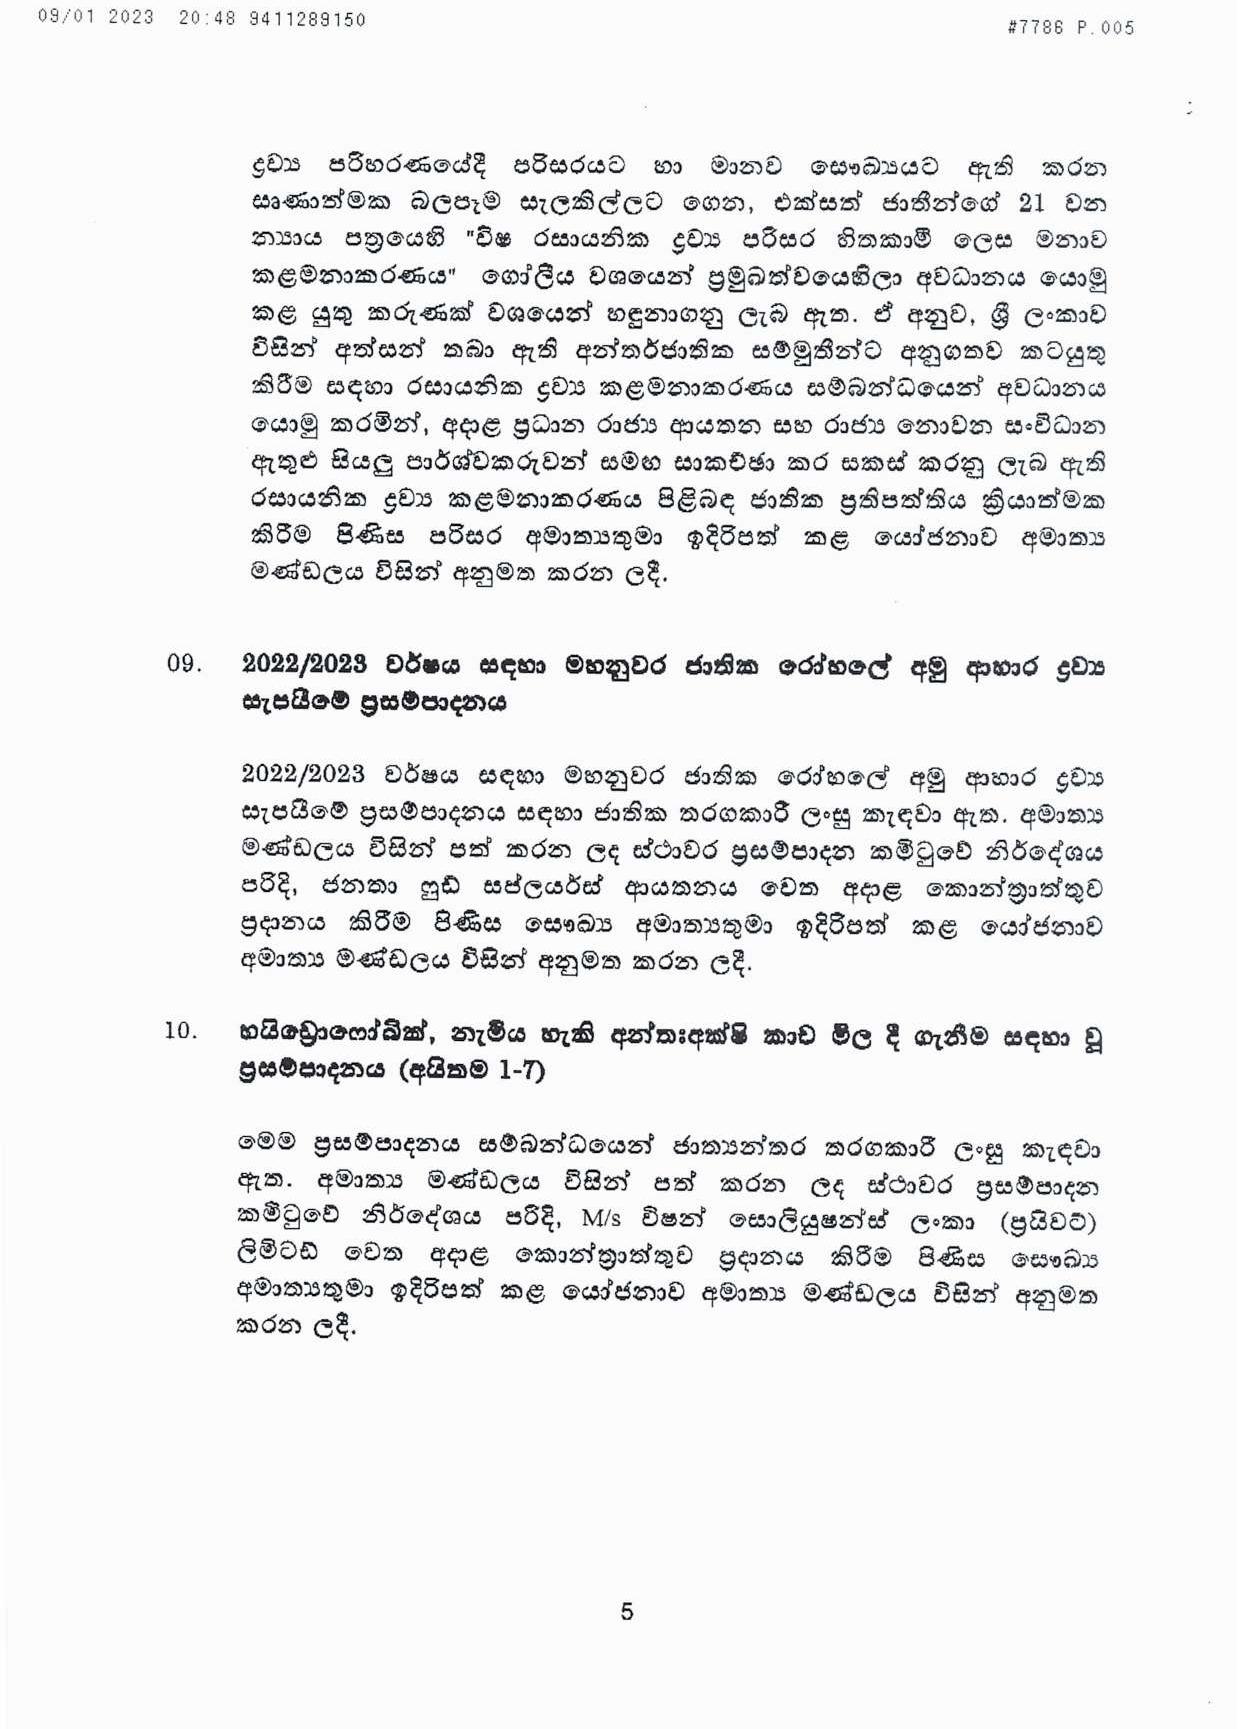 Cabinet Decision on 09.01.2023 page 005